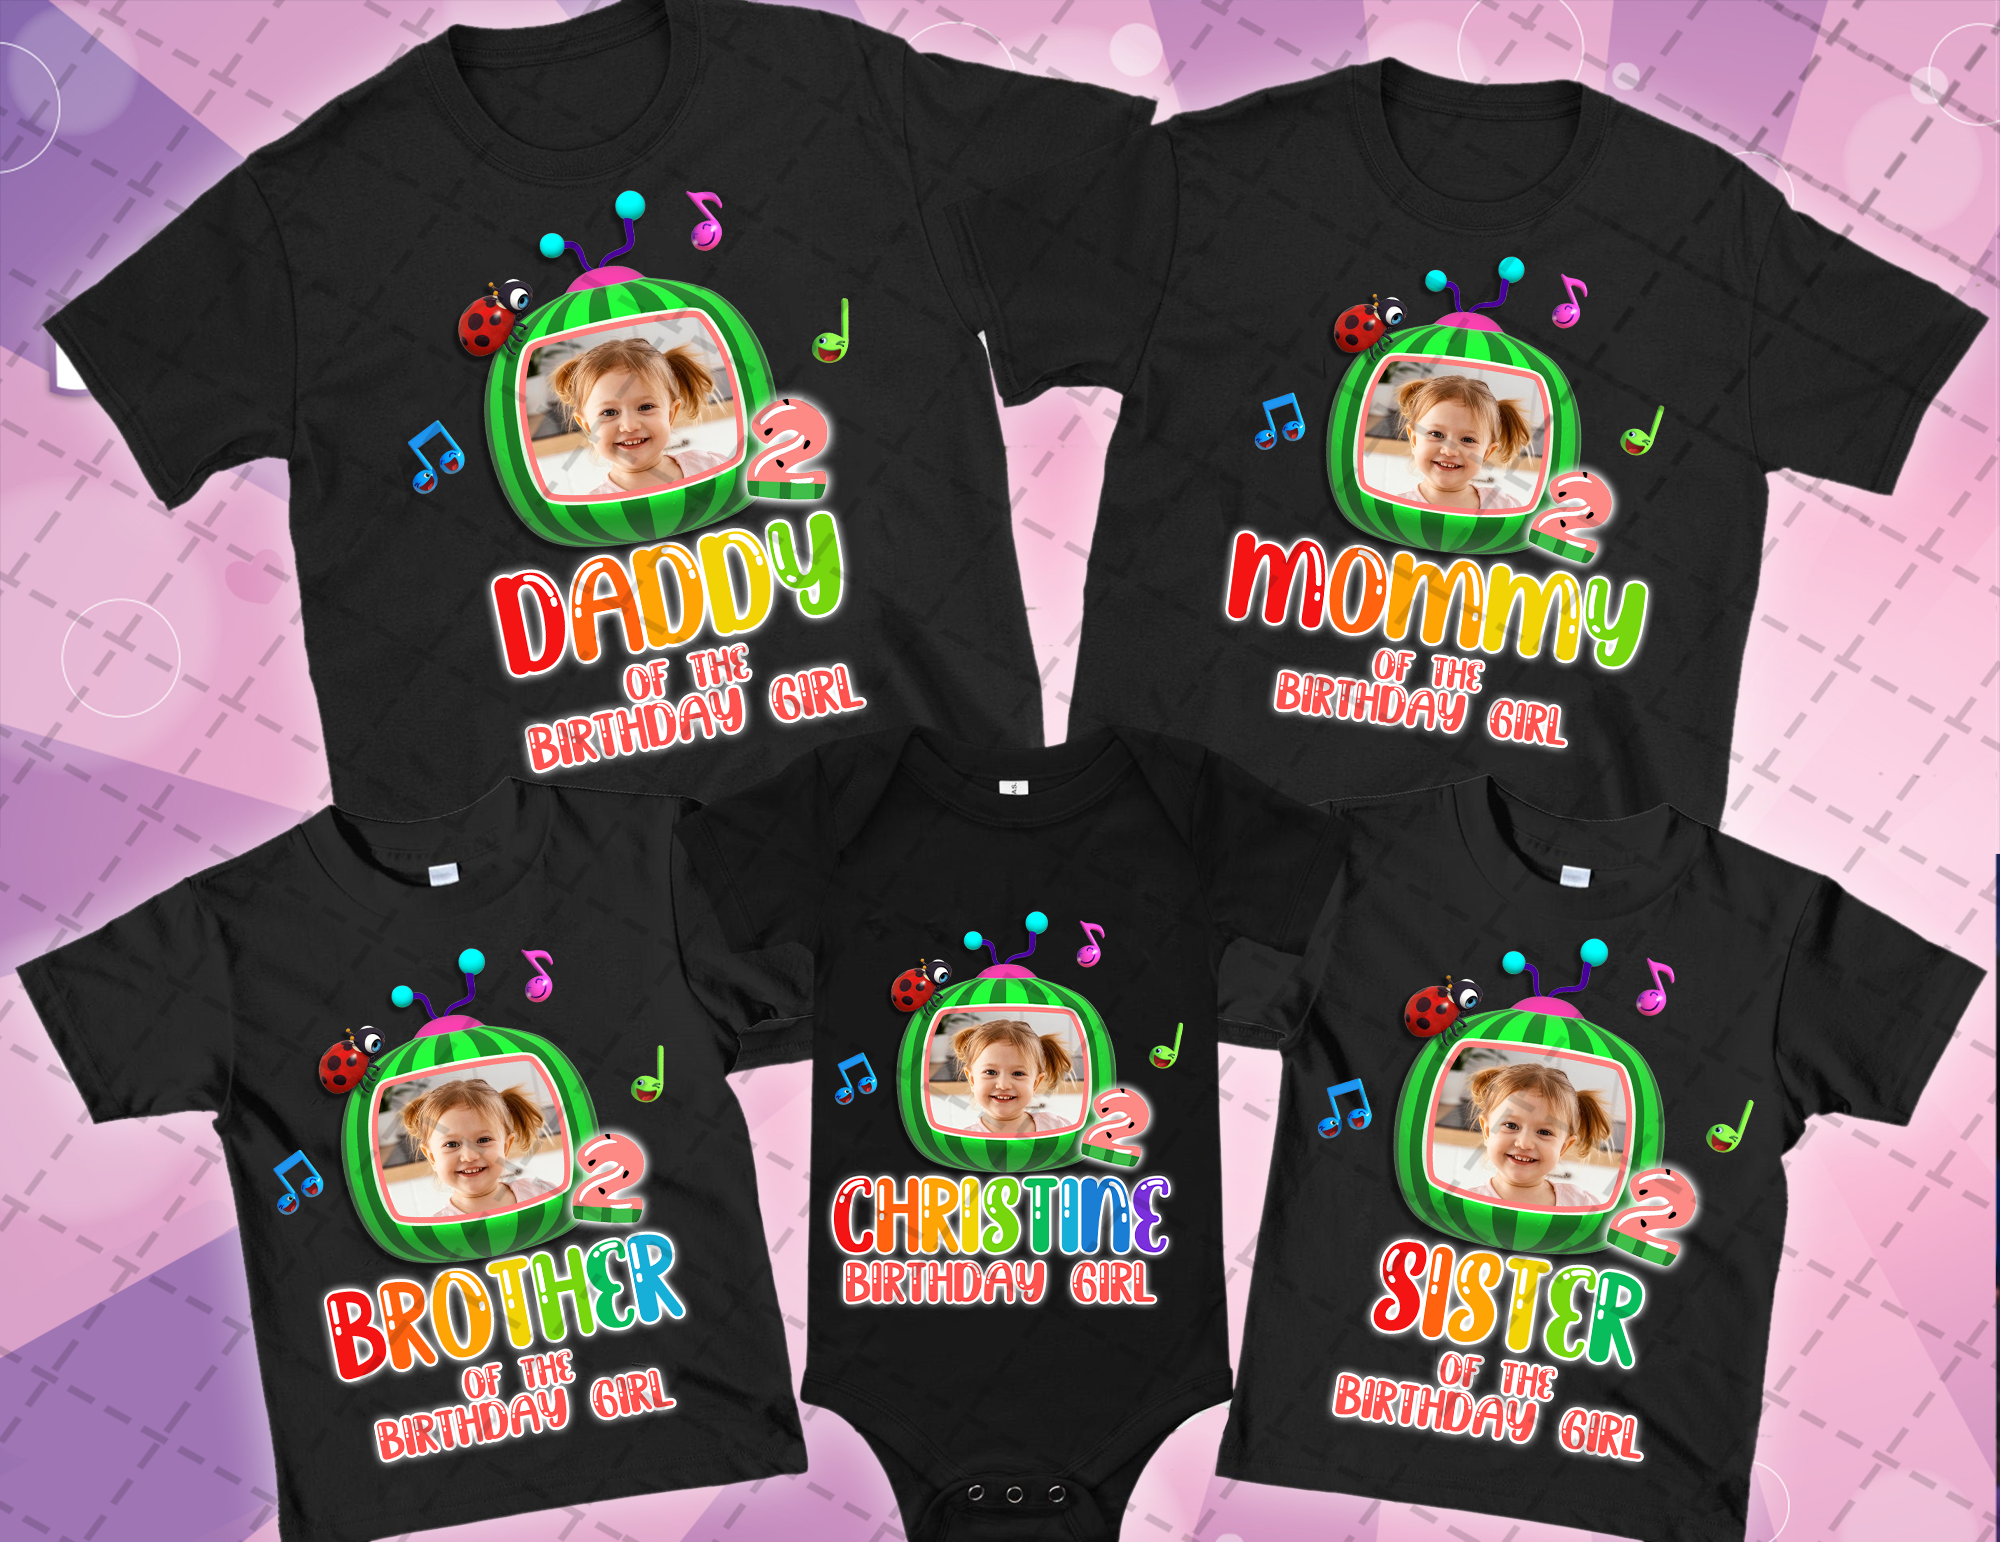 Personalized Cocomelon Family Matching Shirt, Cocomelon Family Birthday Boy Shirt, Melon Birthday Boy Shirt, Birthday Shirt Gift For Kids